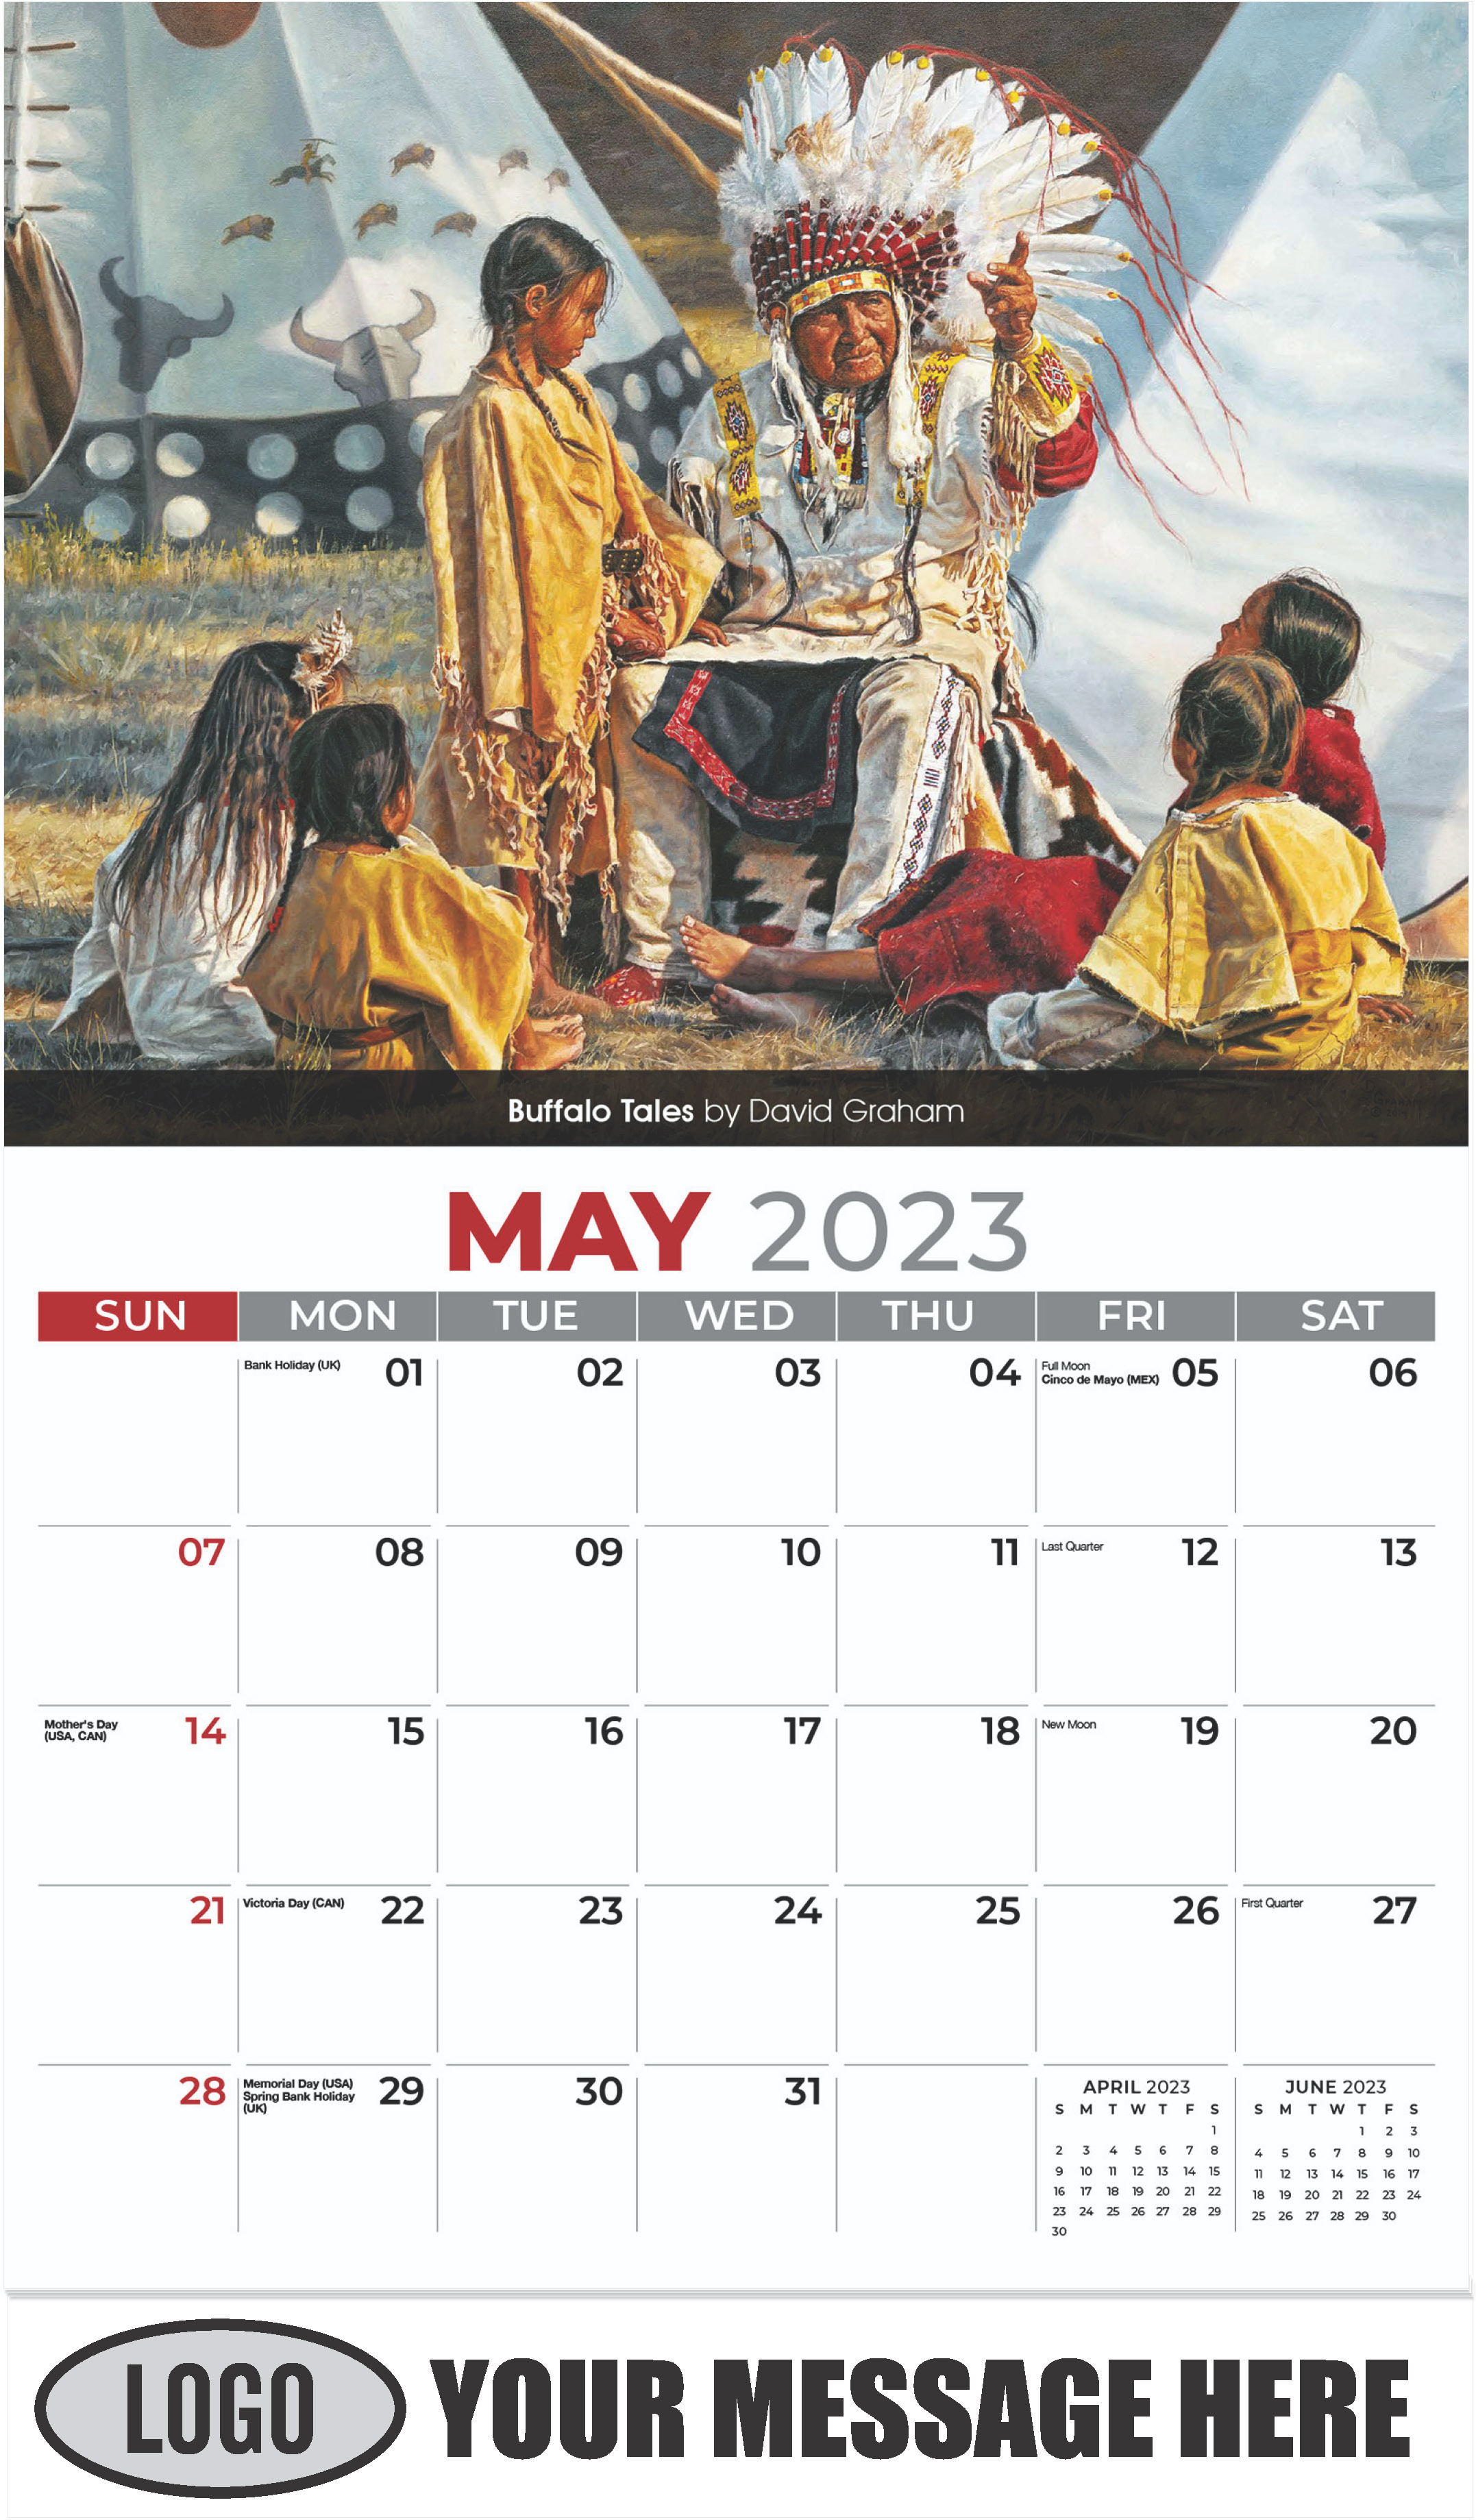 Buffalo Tales by David Graham - May - Spirit of the West 2023 Promotional Calendar